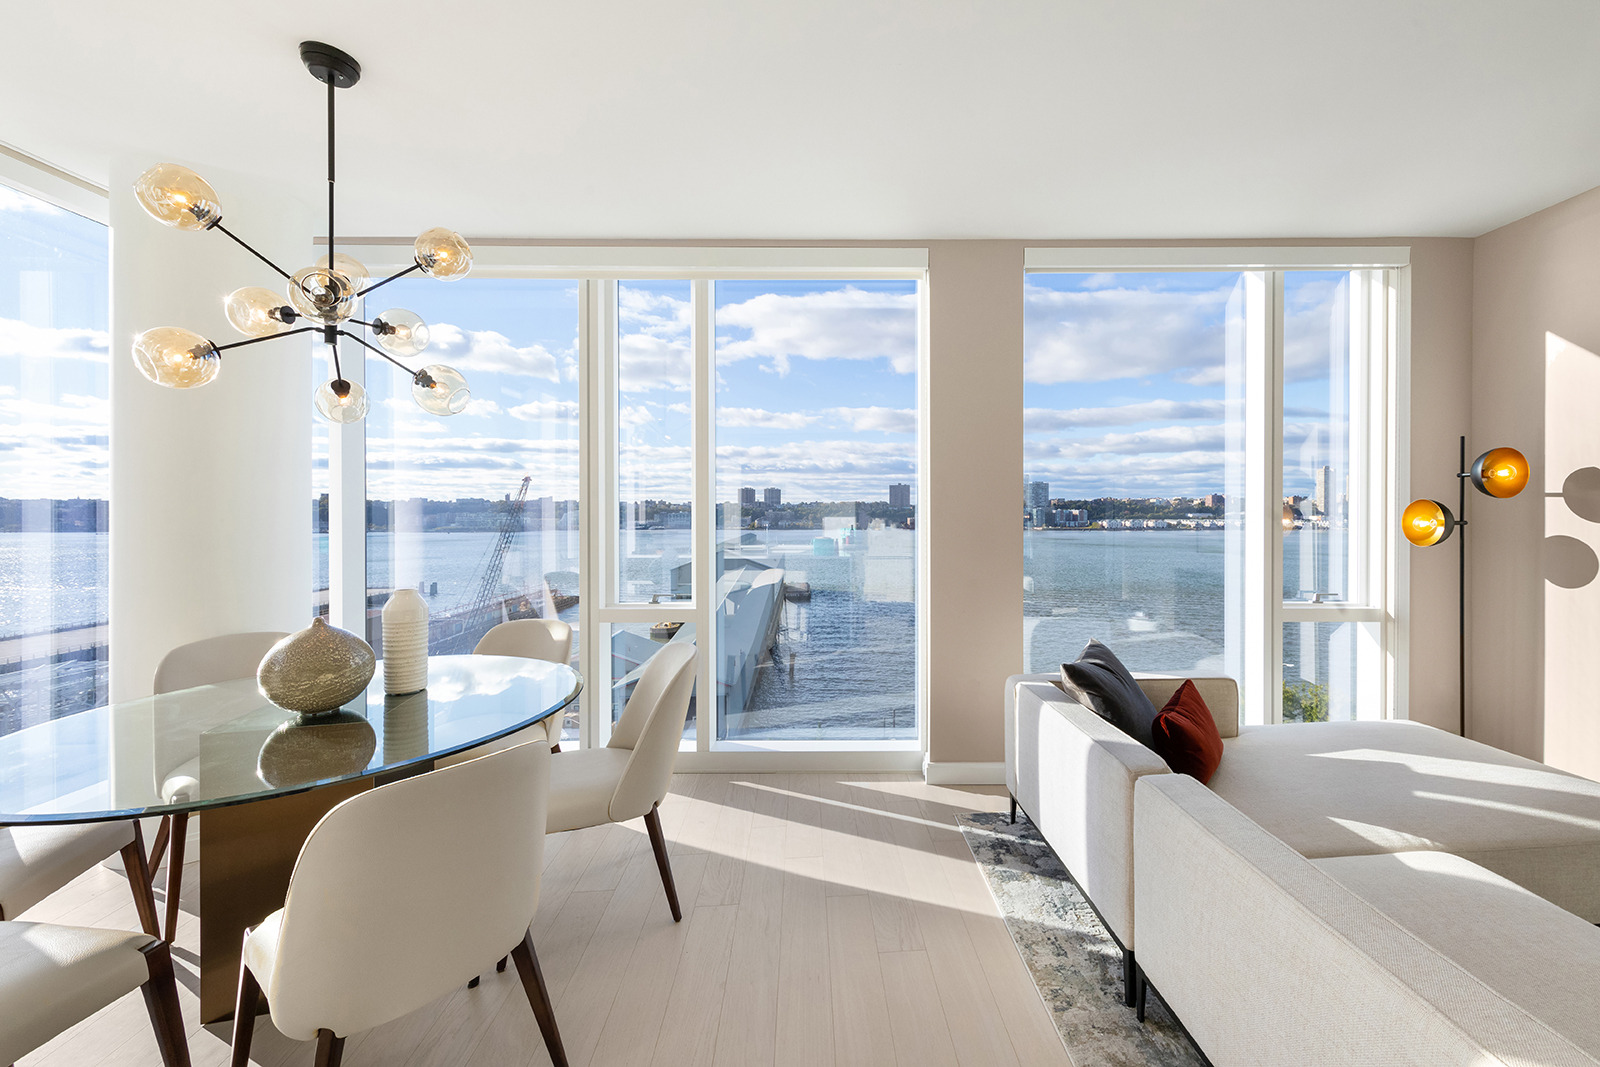 Bright and modern living space with expansive windows offering a panoramic view of the waterfront.